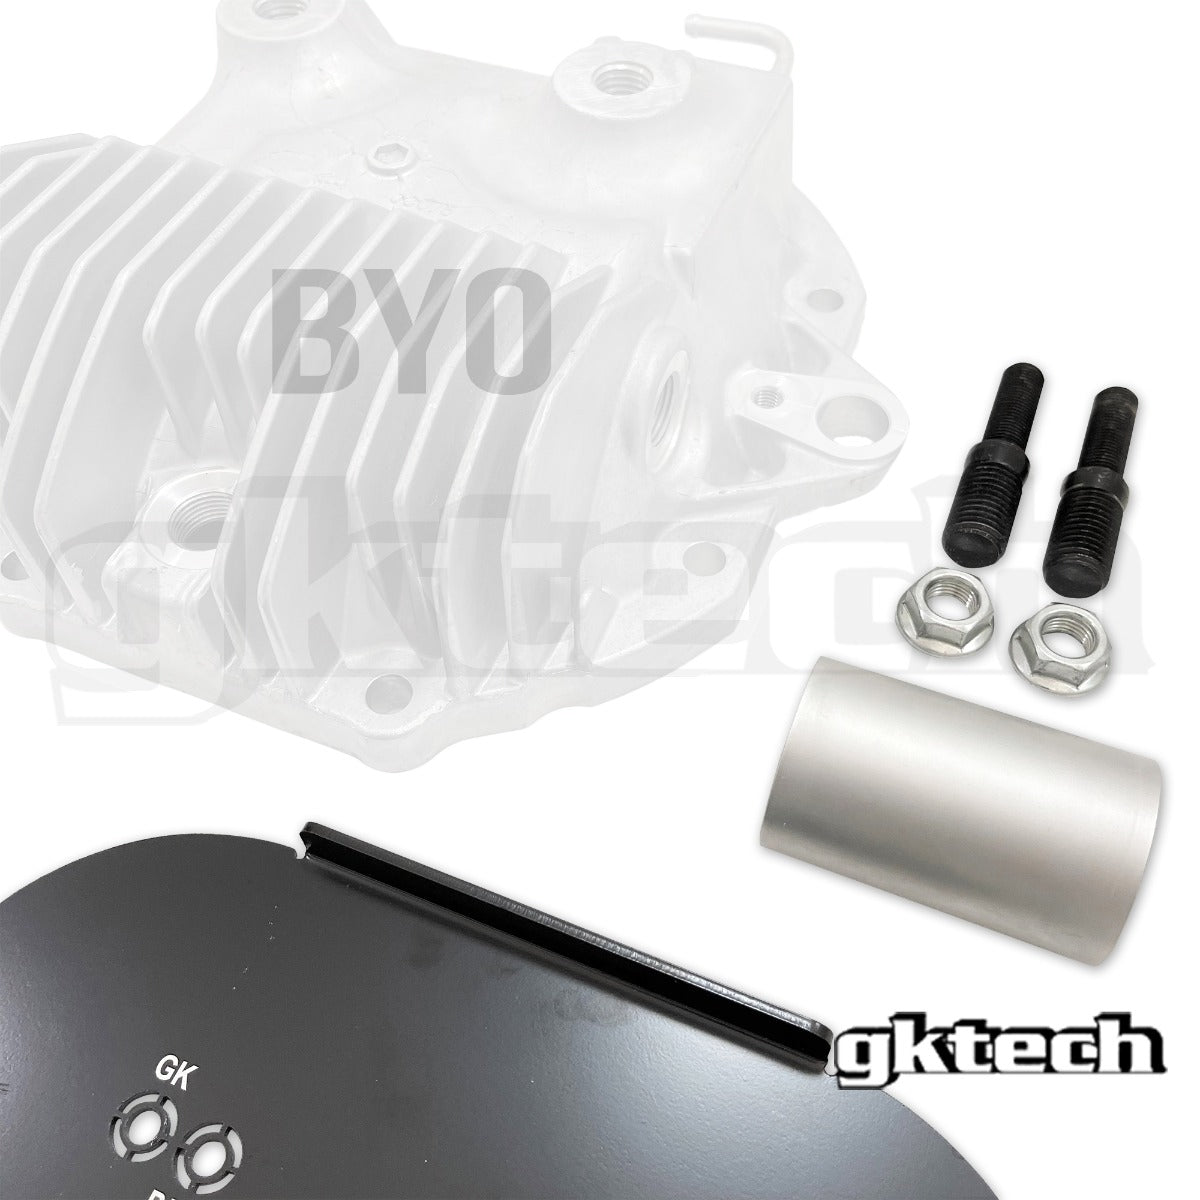 Pathfinder diff cover to Z33/Z34 subframe conversion bushes